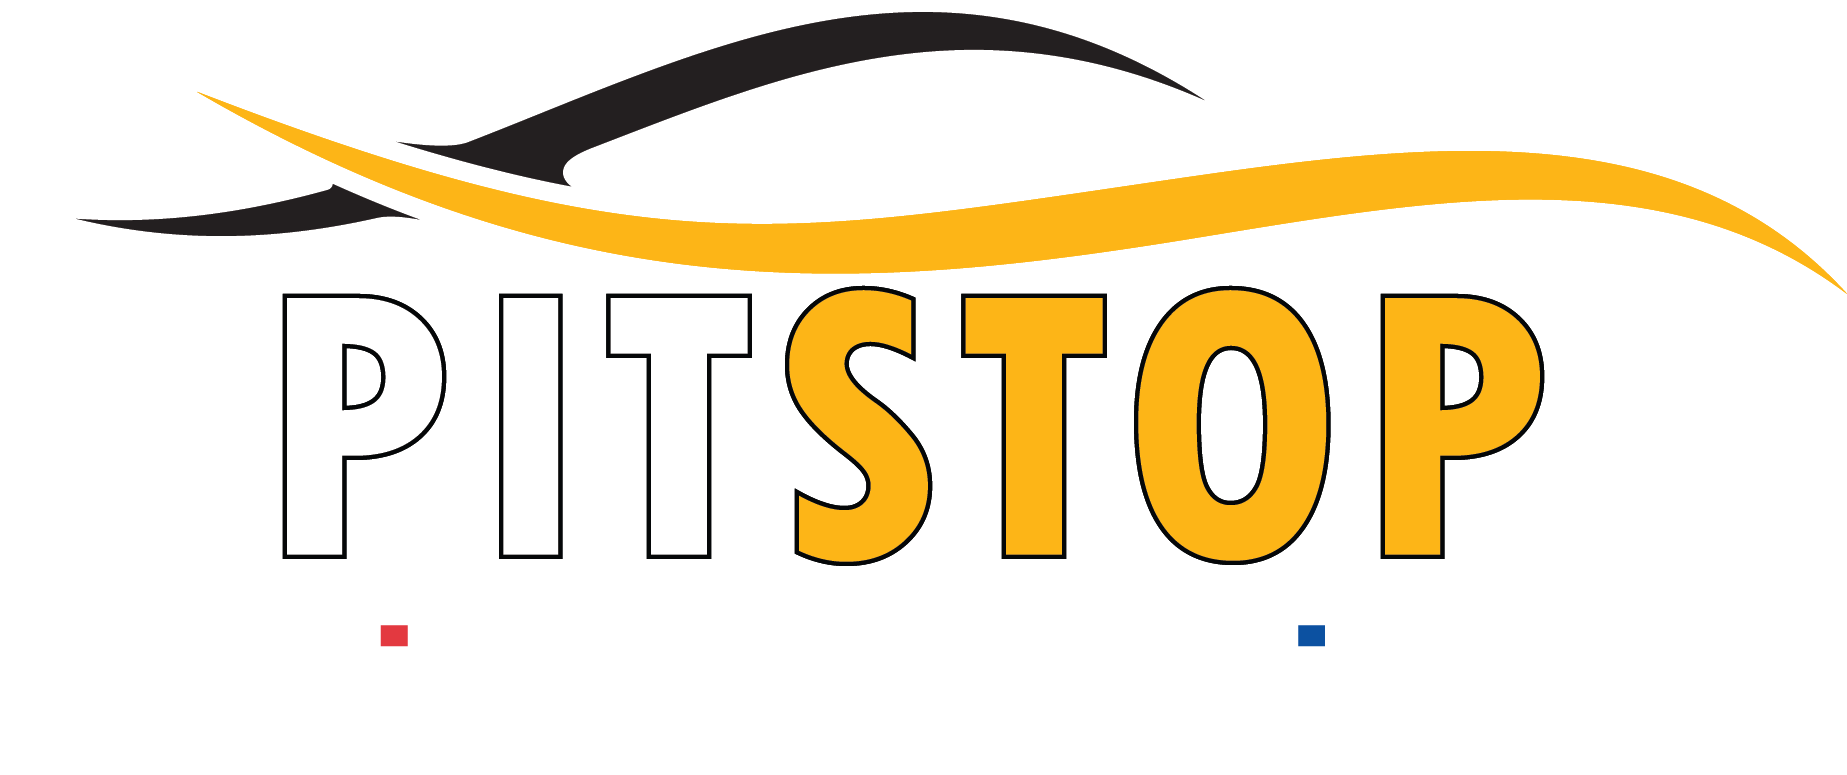 Pit Stop Png - Pitstop Airport Valet Logo, Transparent background PNG HD thumbnail